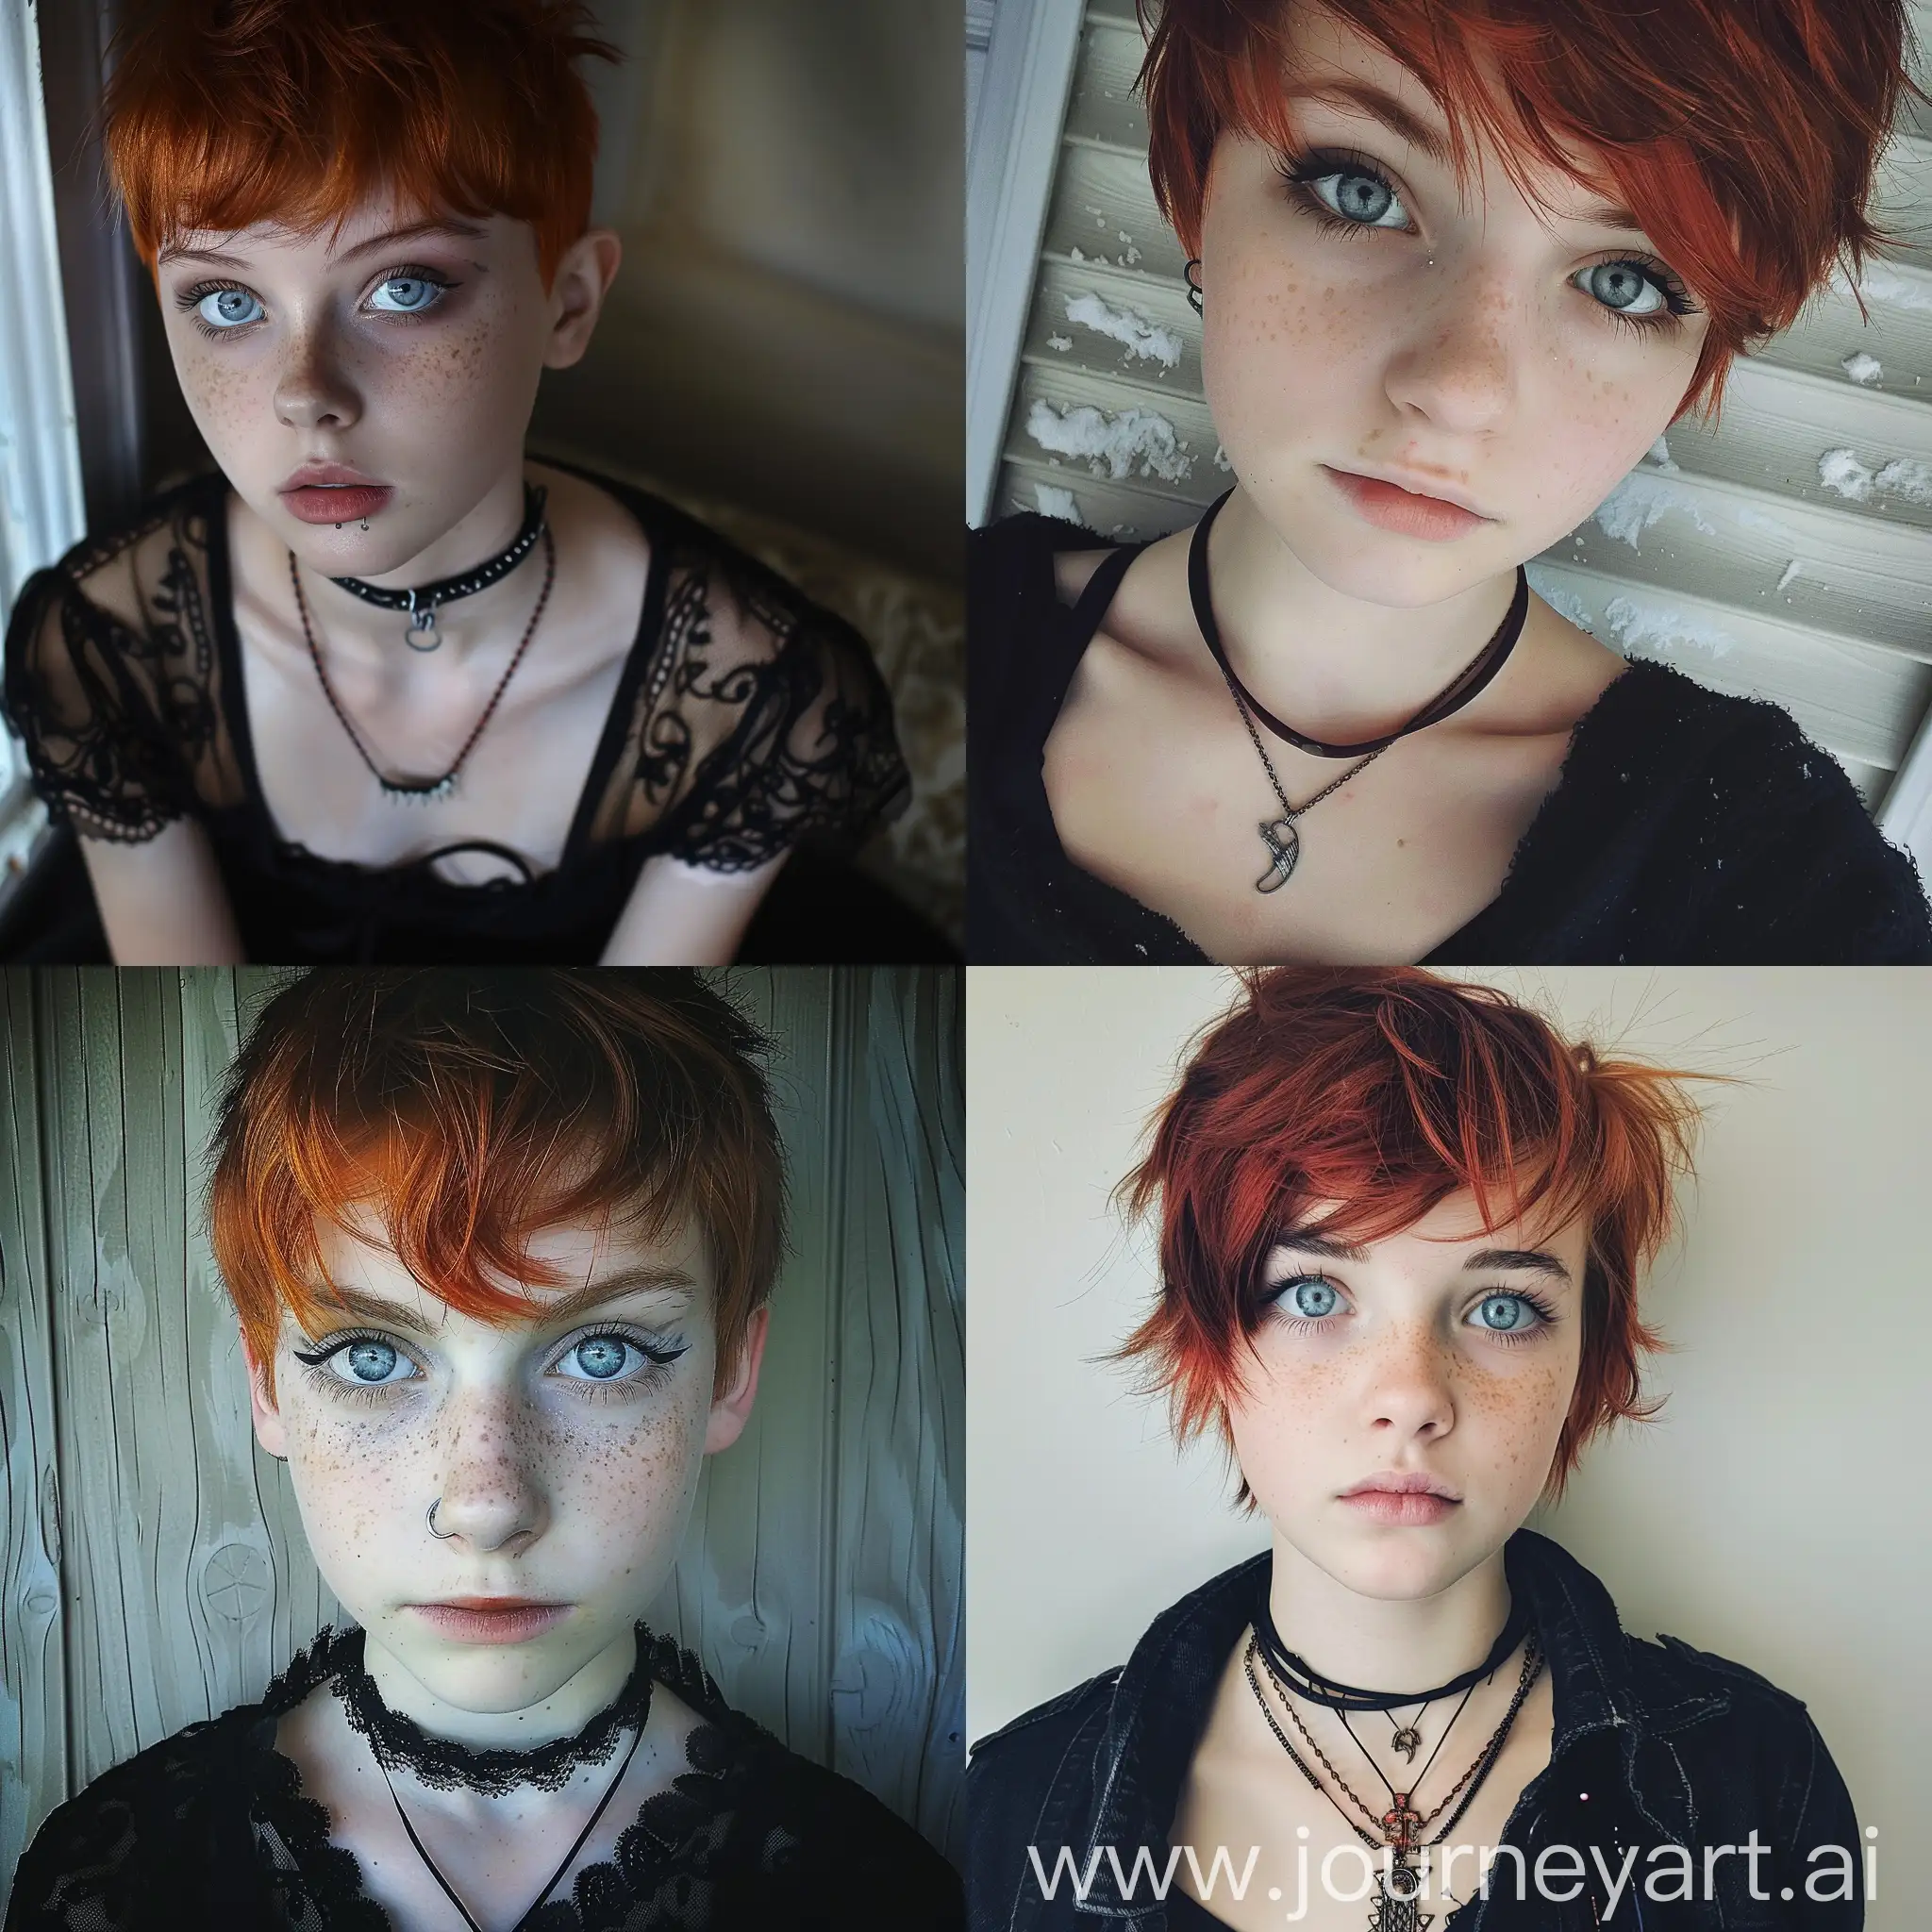 Gothic-Teen-with-Pixie-Cut-RedHaired-Girl-with-Icy-Blue-Eyes